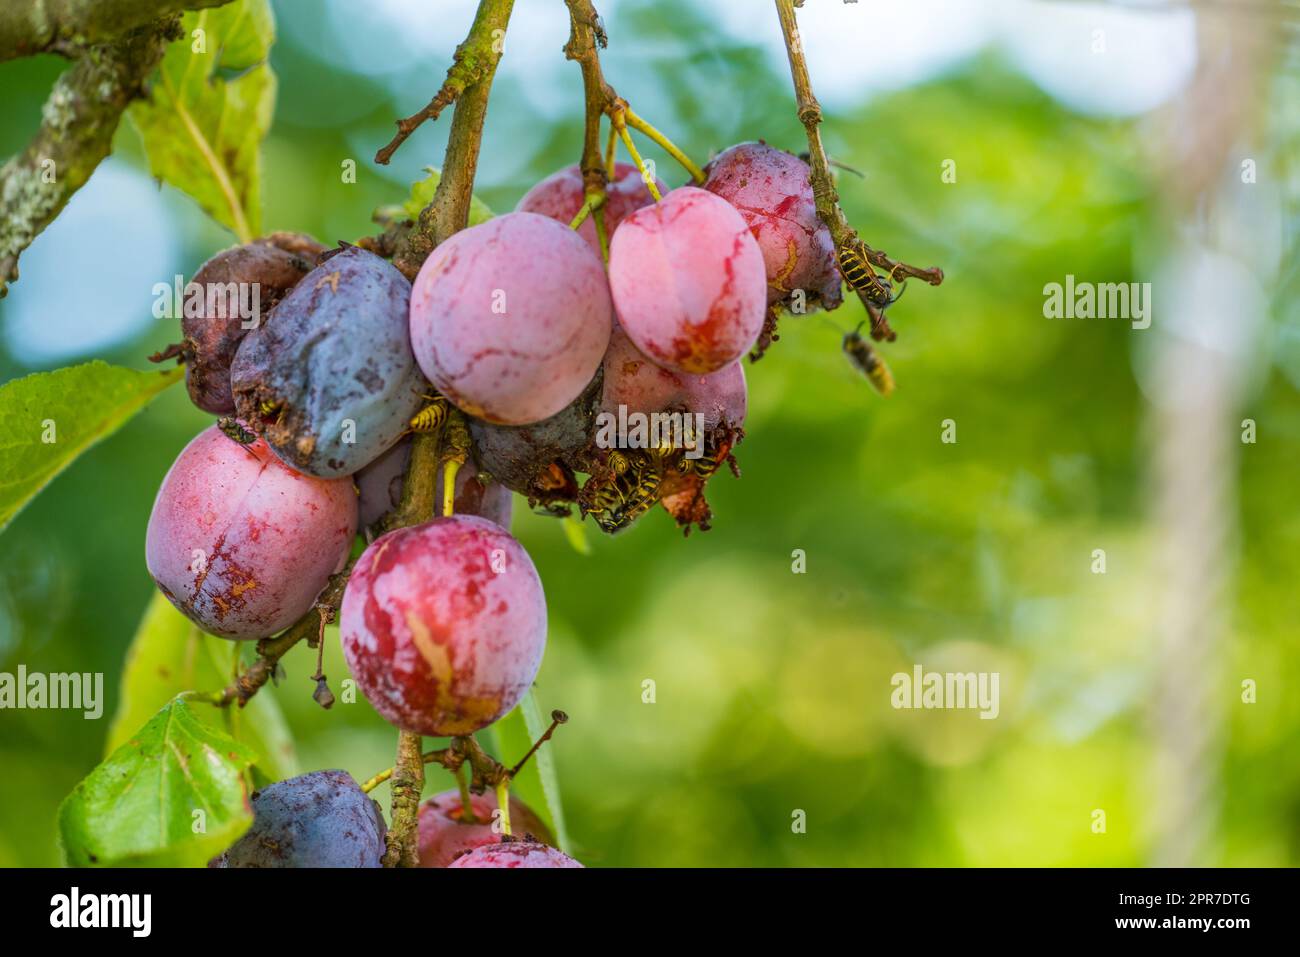 Closeup of many wasps eating ripe sweet plums growing on a tree in a garden or field. Macro details of wildlife in nature, organic fruit hanging from branches in rural countryside with copy space Stock Photo